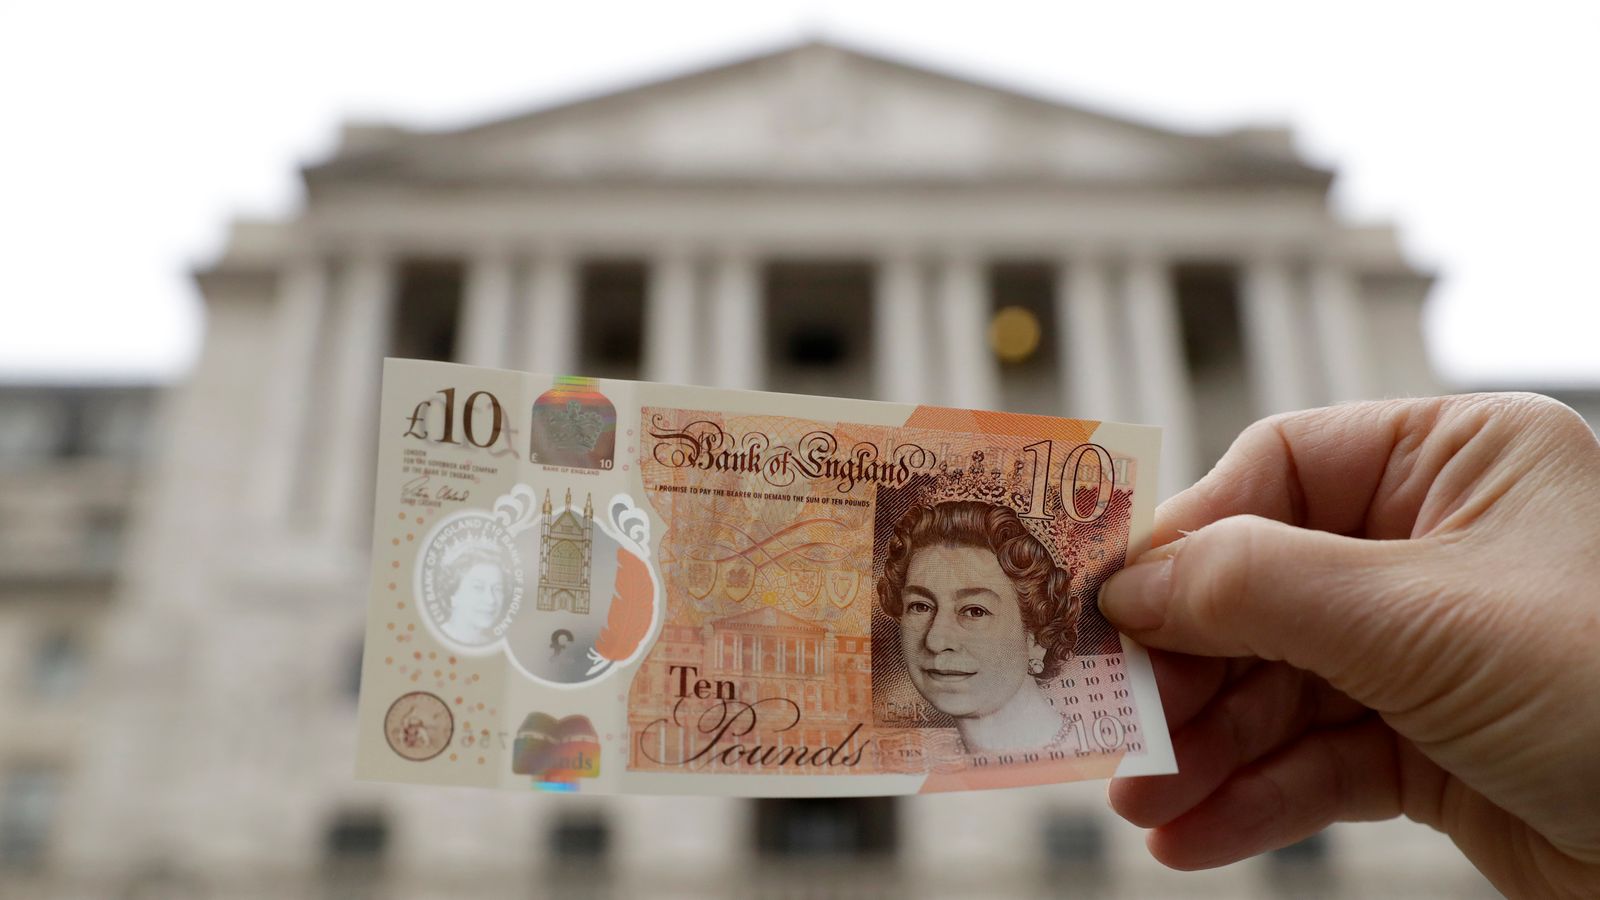 Banks not passing on higher interest rates to savers mean customers miss out on £23bn